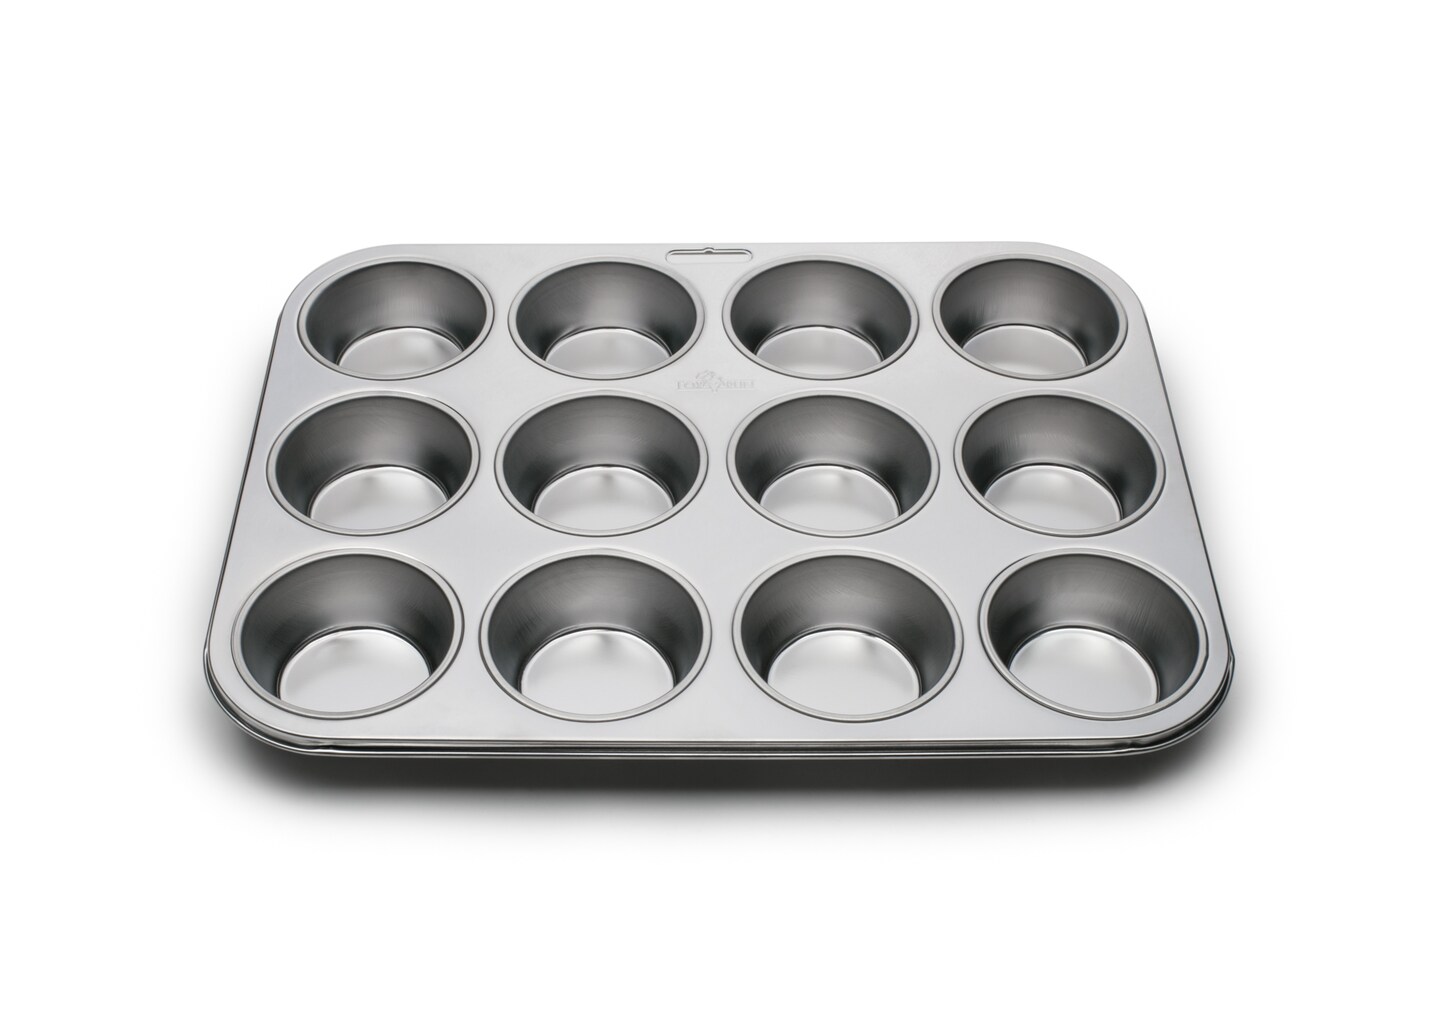 Metallic Stainless Steel Muffin Pan 12 Cup